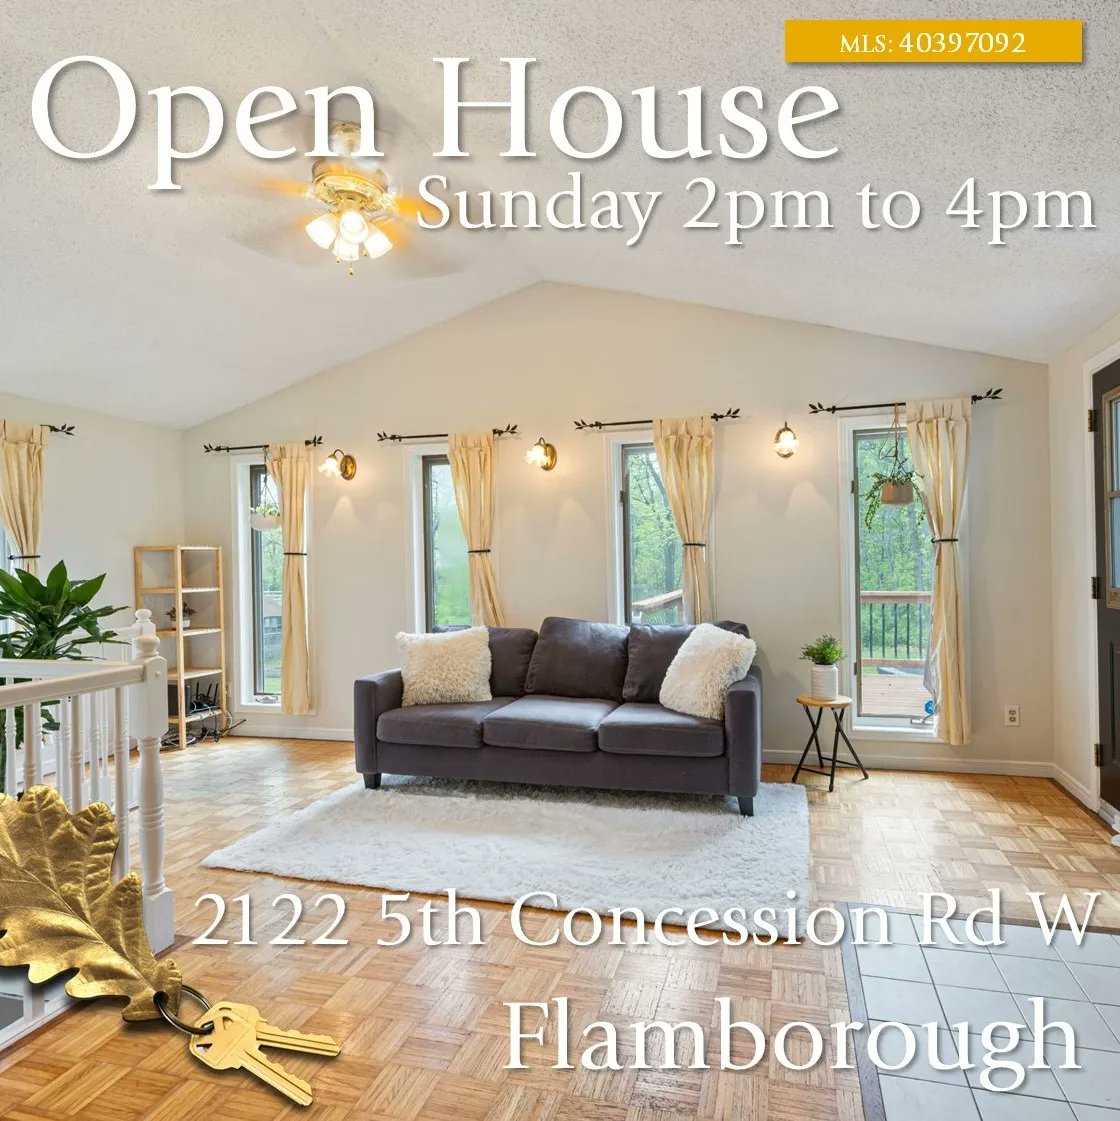 Explore our open houses and unlock the door to your dream home. With so many great listings, you're bound to find the one that captures your heart. Don't miss out! More details can be found at buff.ly/3L23QDT 
#DreamHome #ParisON #FlamboroughON #WaterlooON #Cbridge